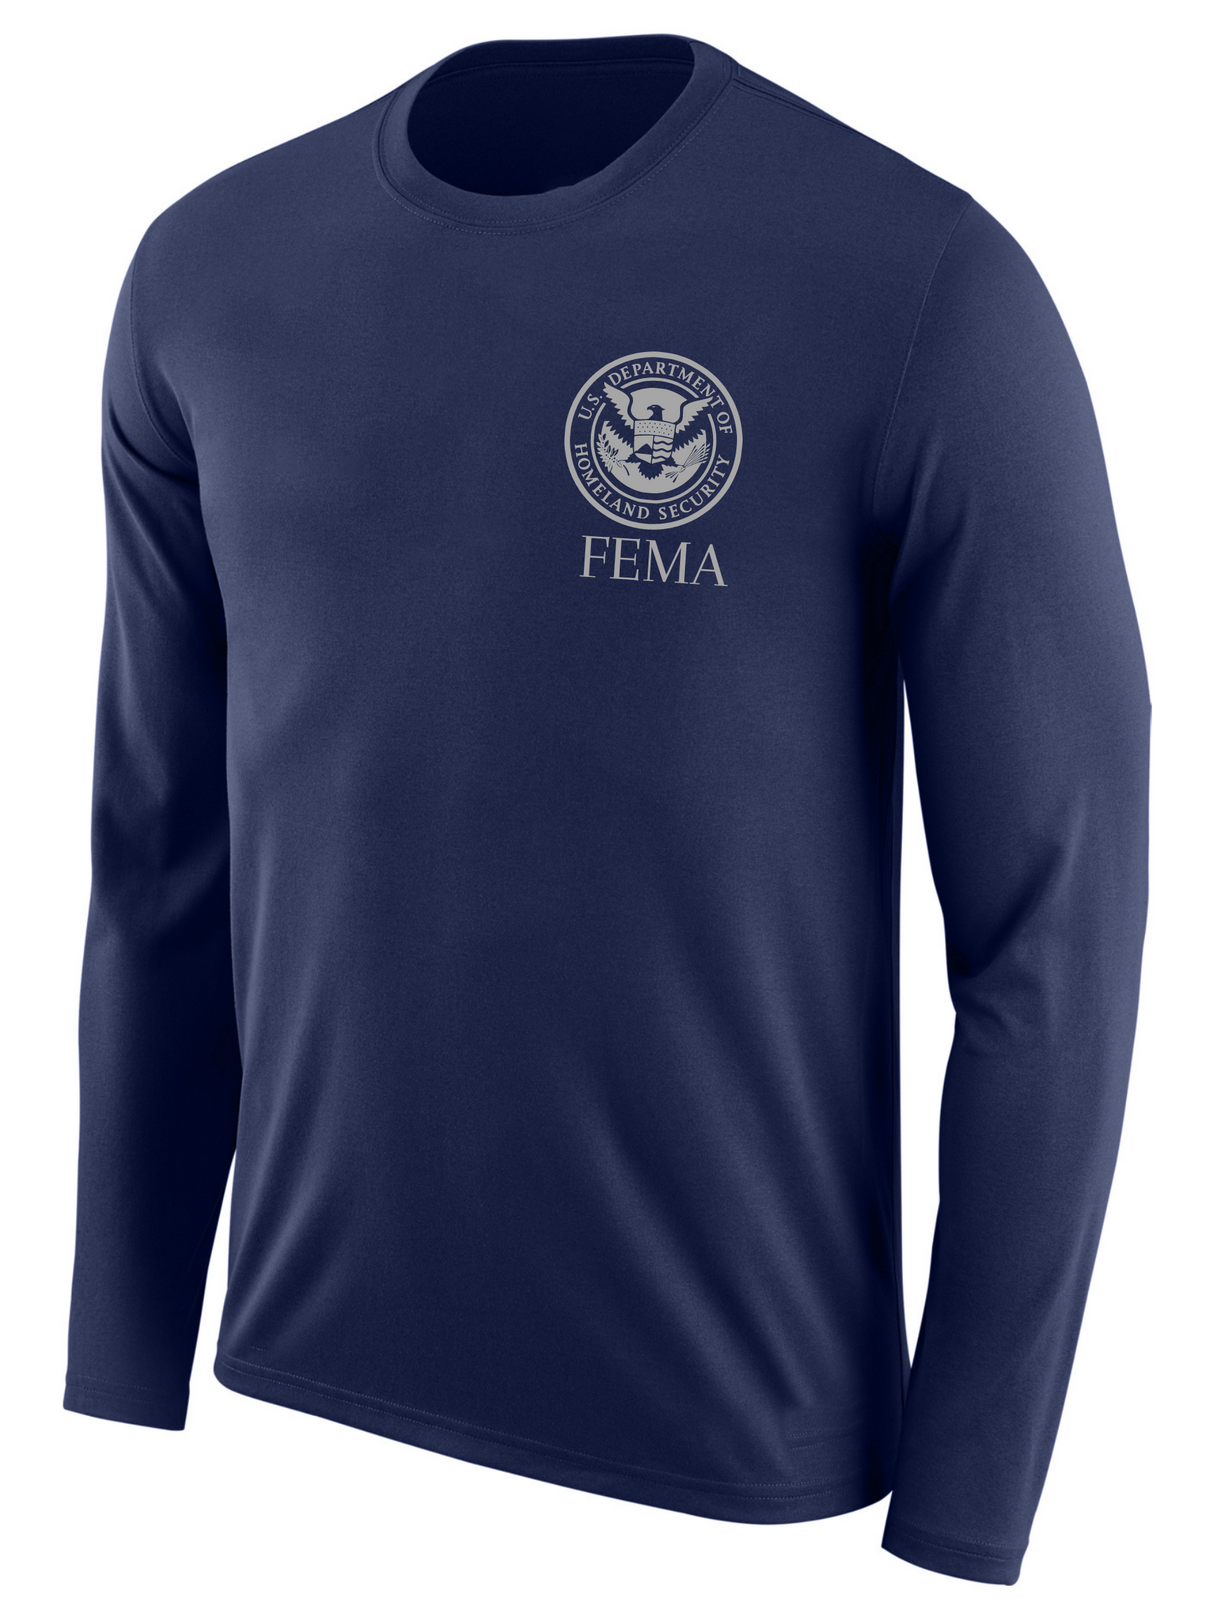 SUBDUED FEMA Disaster Relief Agency Identifier T Shirt - Long Sleeve - FEDS Apparel